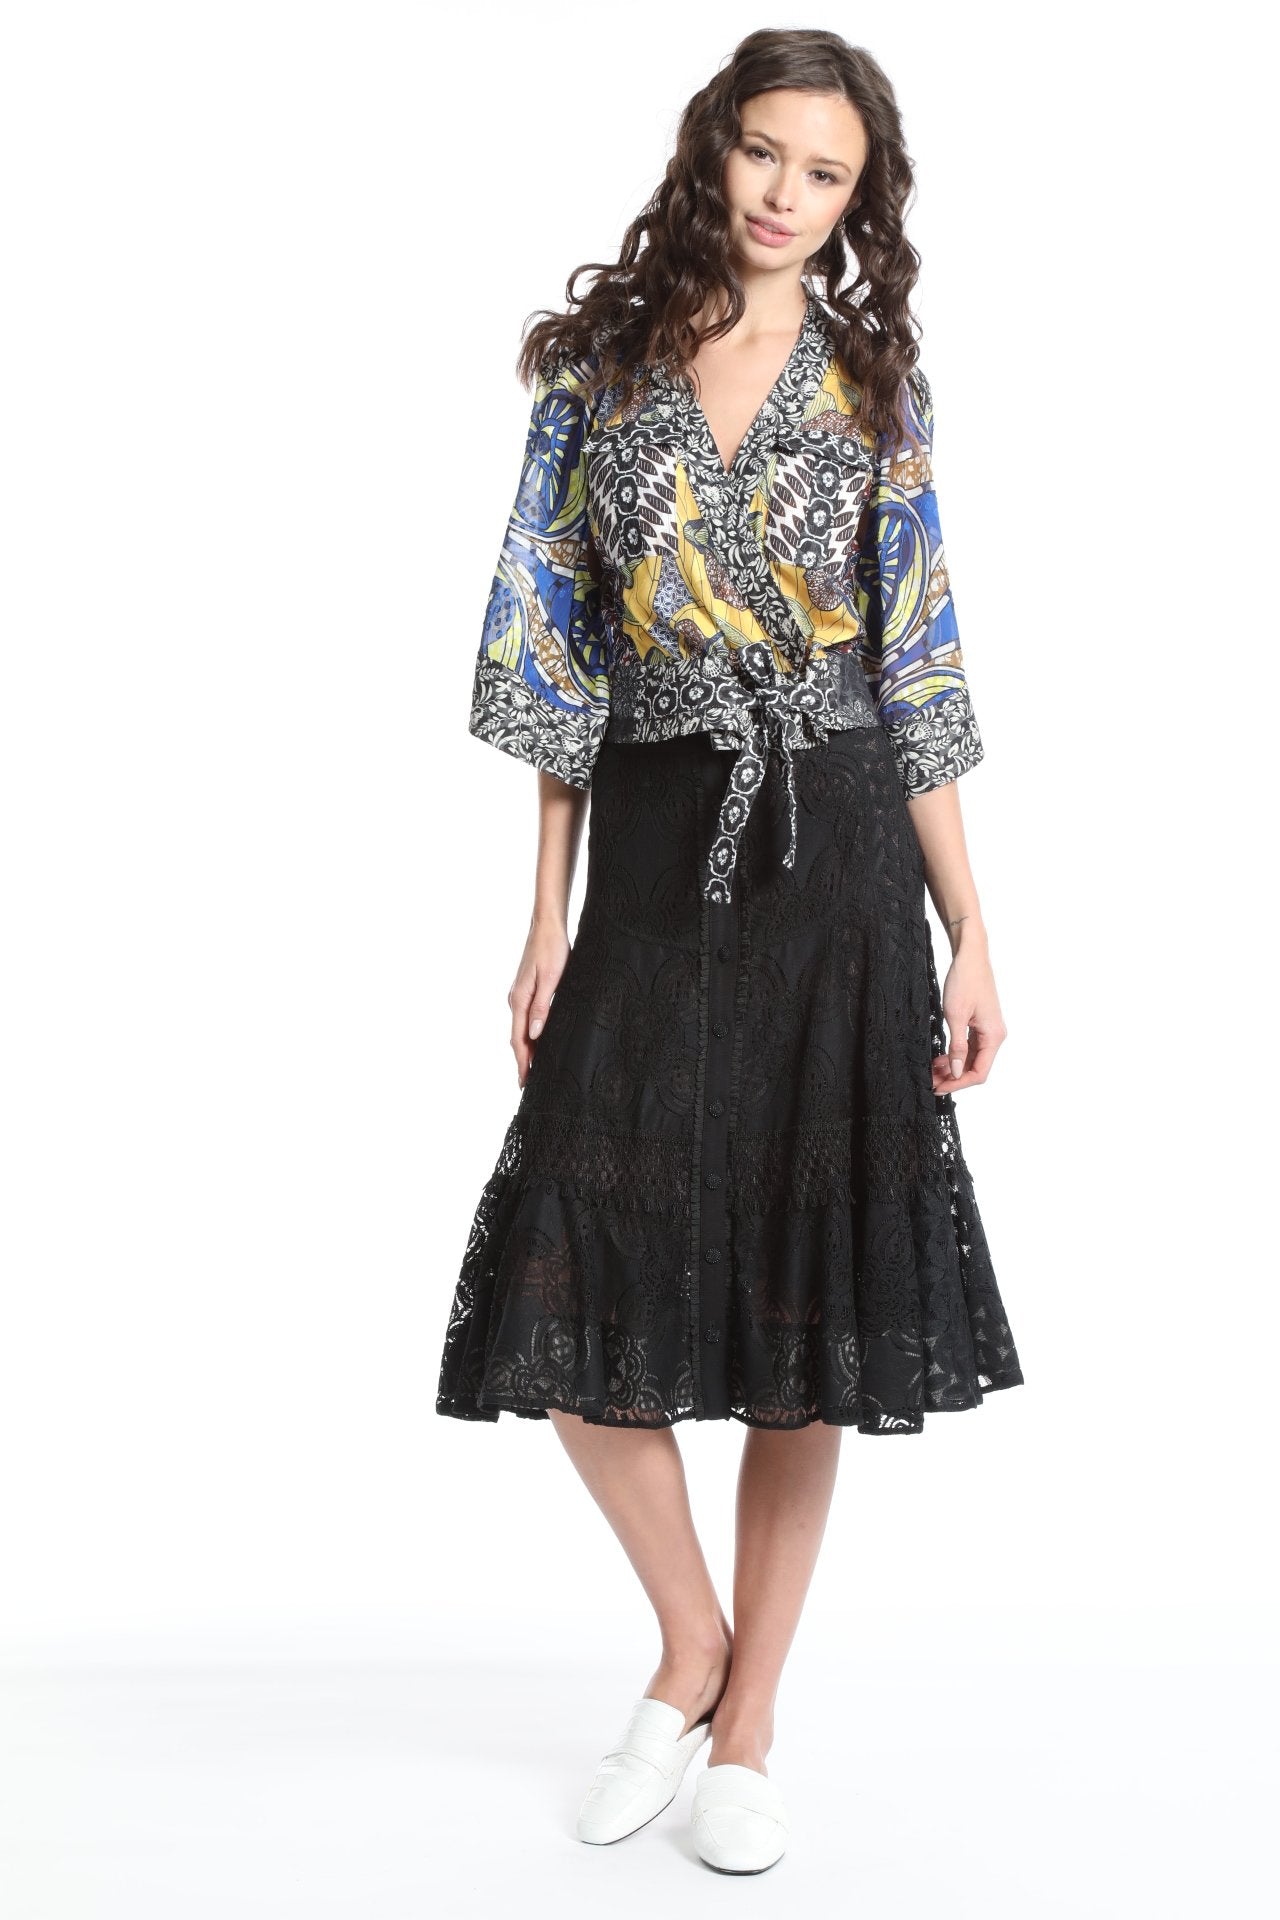 In Earnest Onyx Lace Flared Skirt